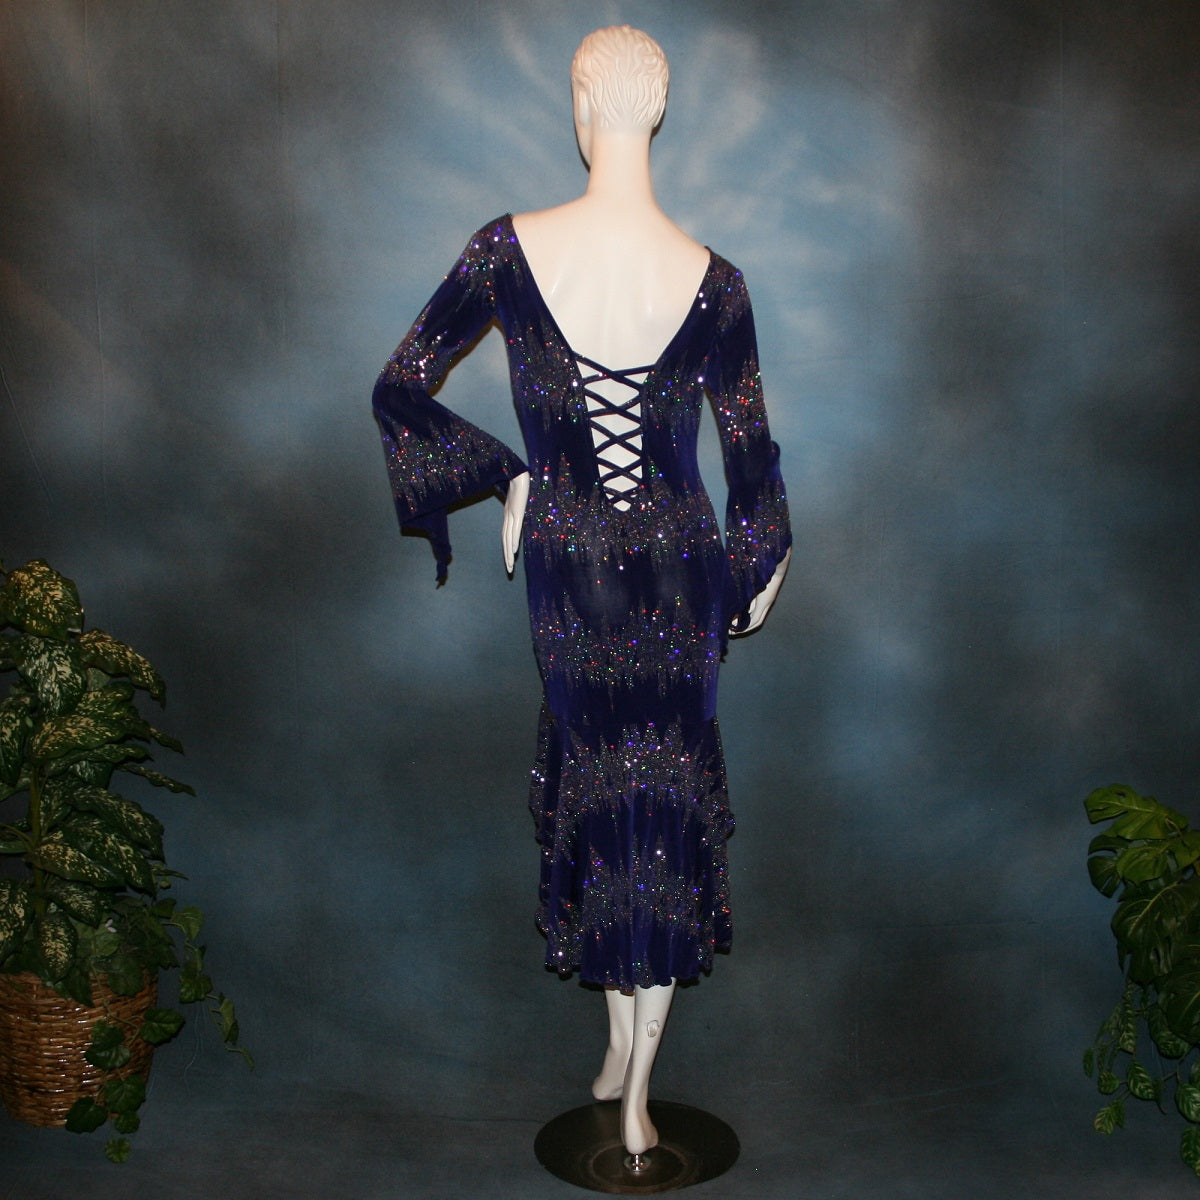 back view of Deep royal purple Latin/rhythm/tango dress created in deep royal purple glitter slinky with an awesome electrifying glitter pattern features long flaired sleeves, lattice strap detailing up the low back & a touch of hand beading in skirting slits.